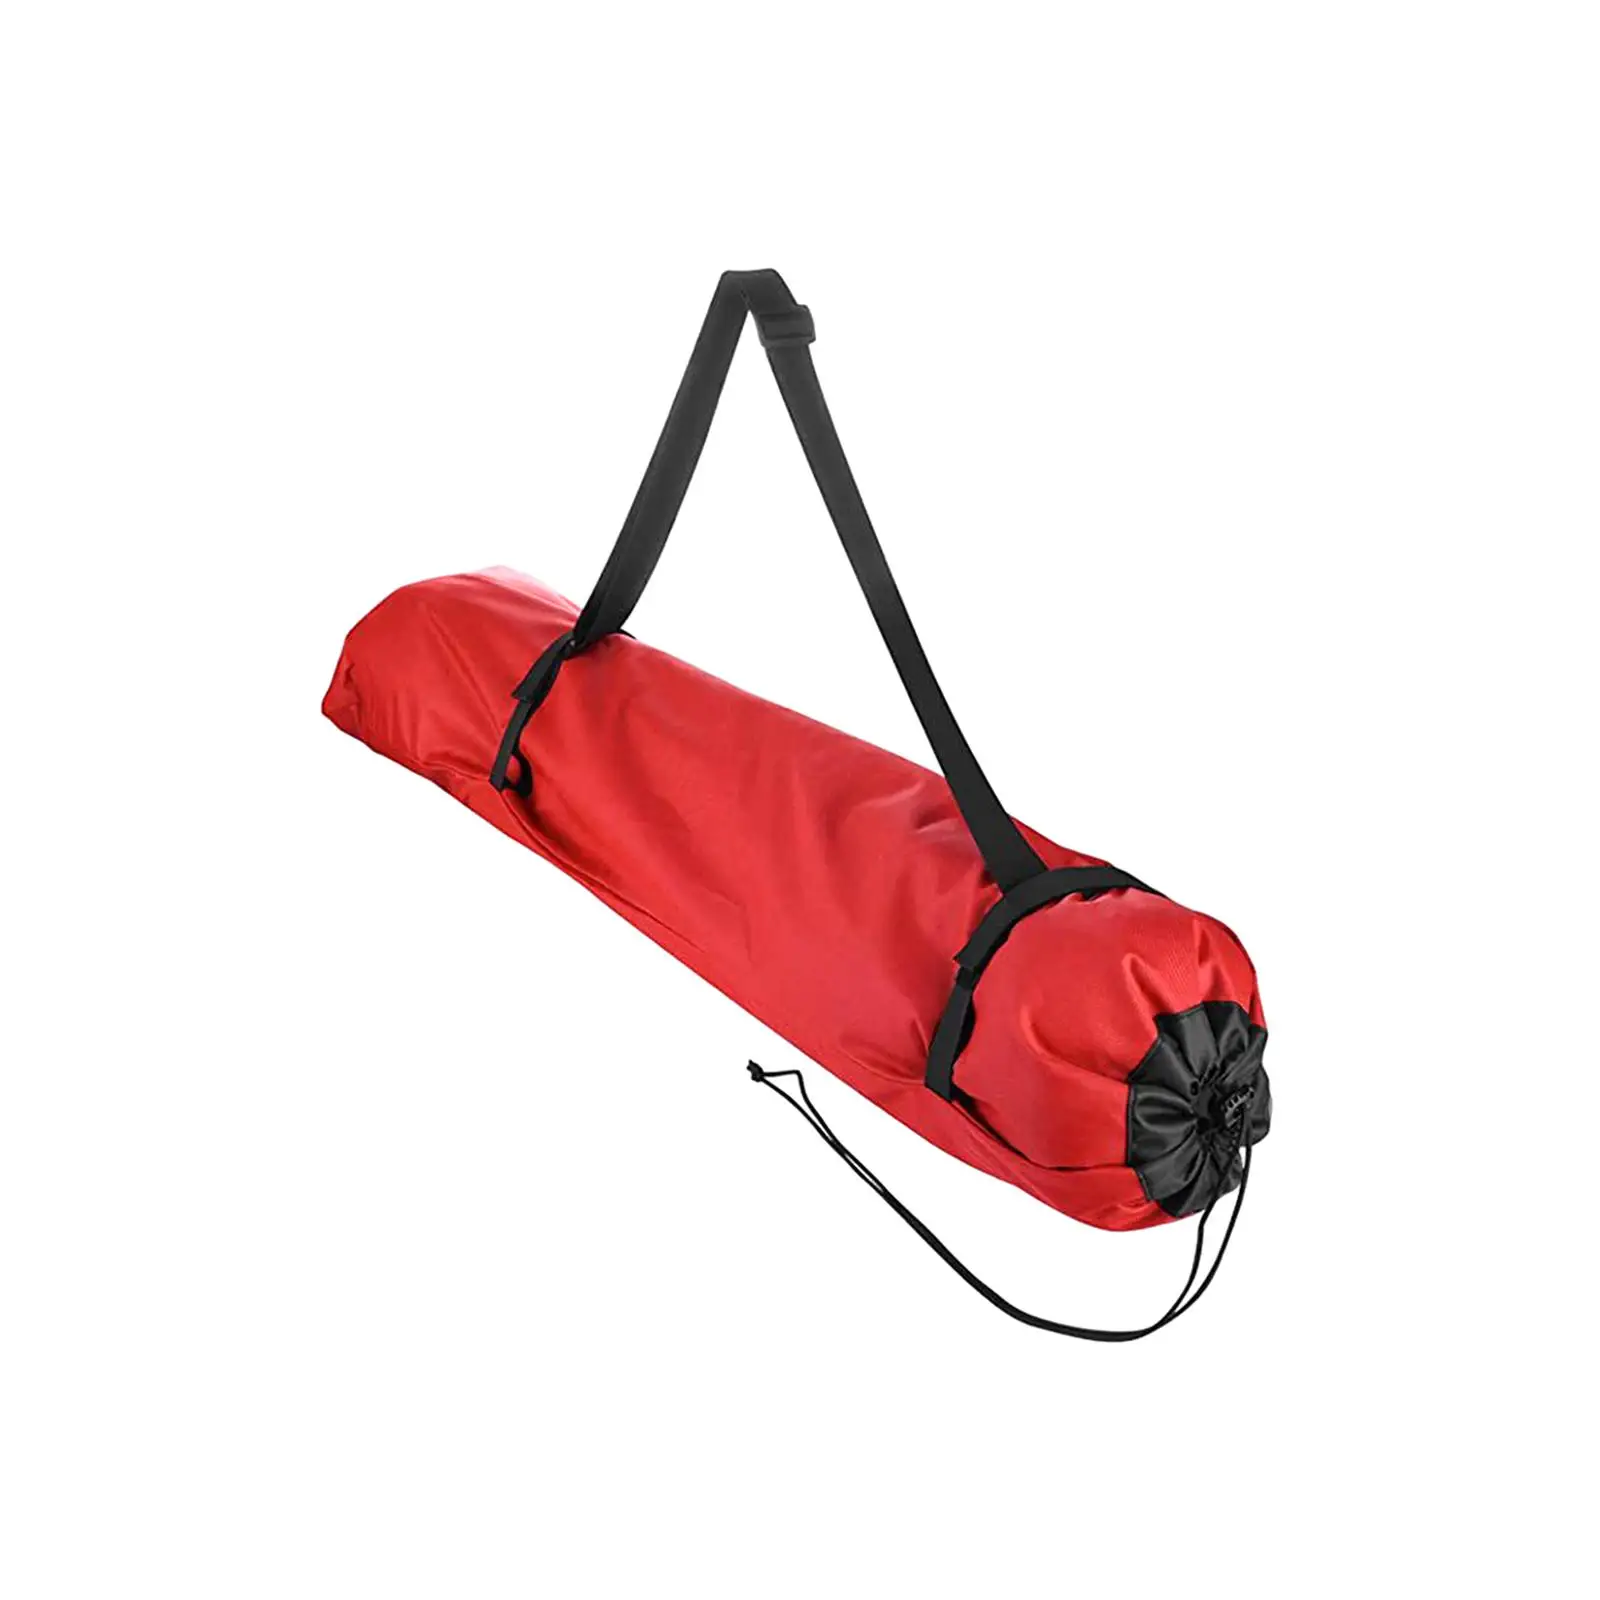 Camping Chair Replacement Bag Folding Chair Storage Bag for Outdoor Home BBQ Drawstring Opening Carry Nylon Storage Tent Bag